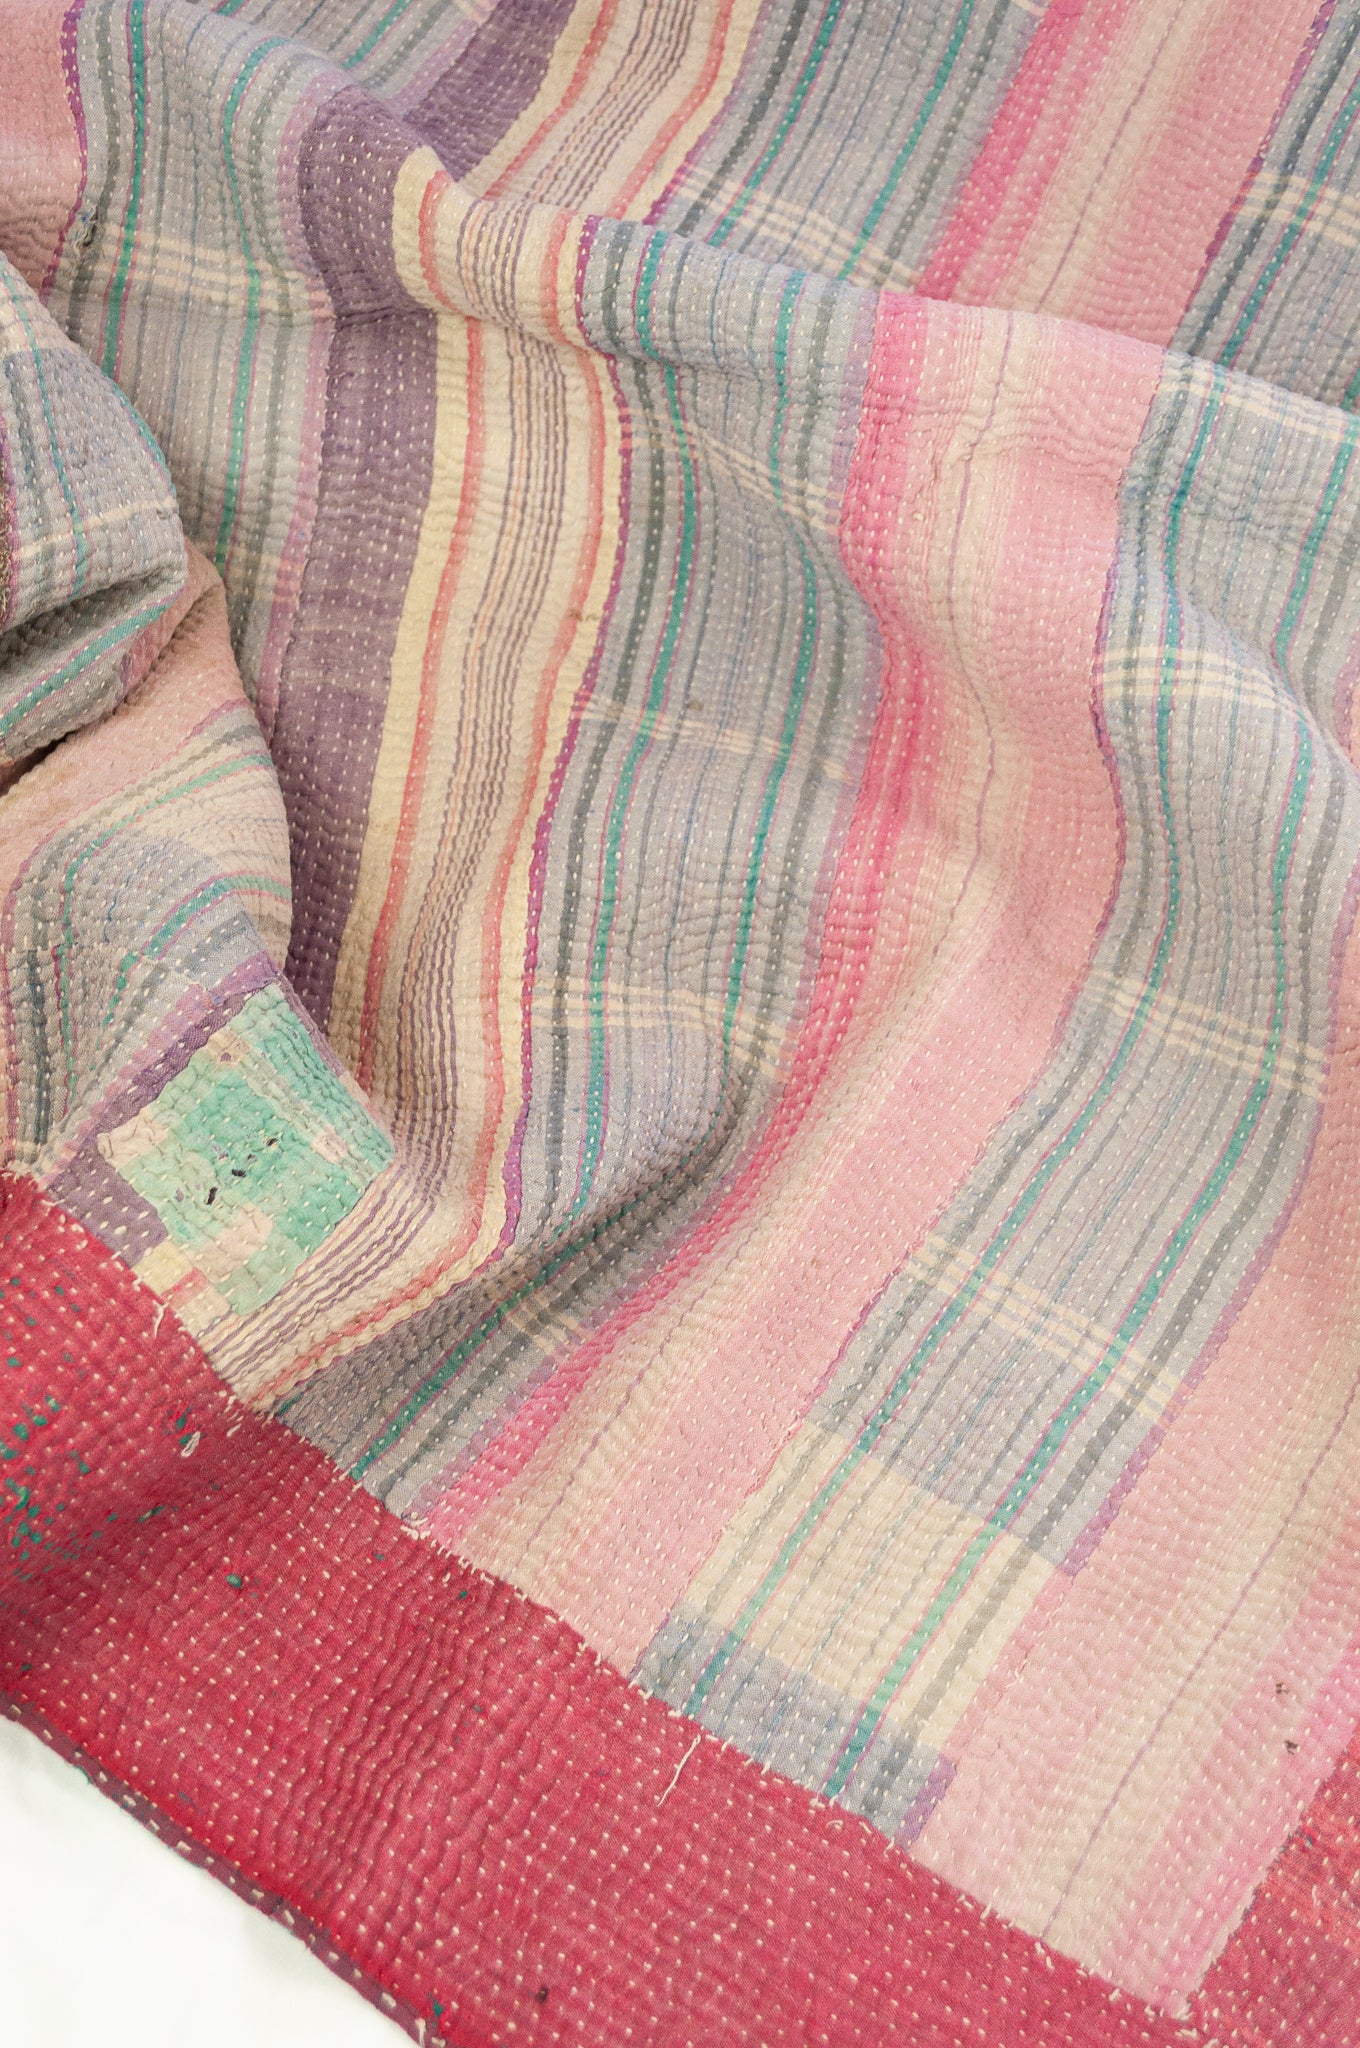 Vintage kantha quilt Radha, heavier weight patchwork, stripes in rose pink, mint green and shades of mauve, emerald green and green check on the reverse.